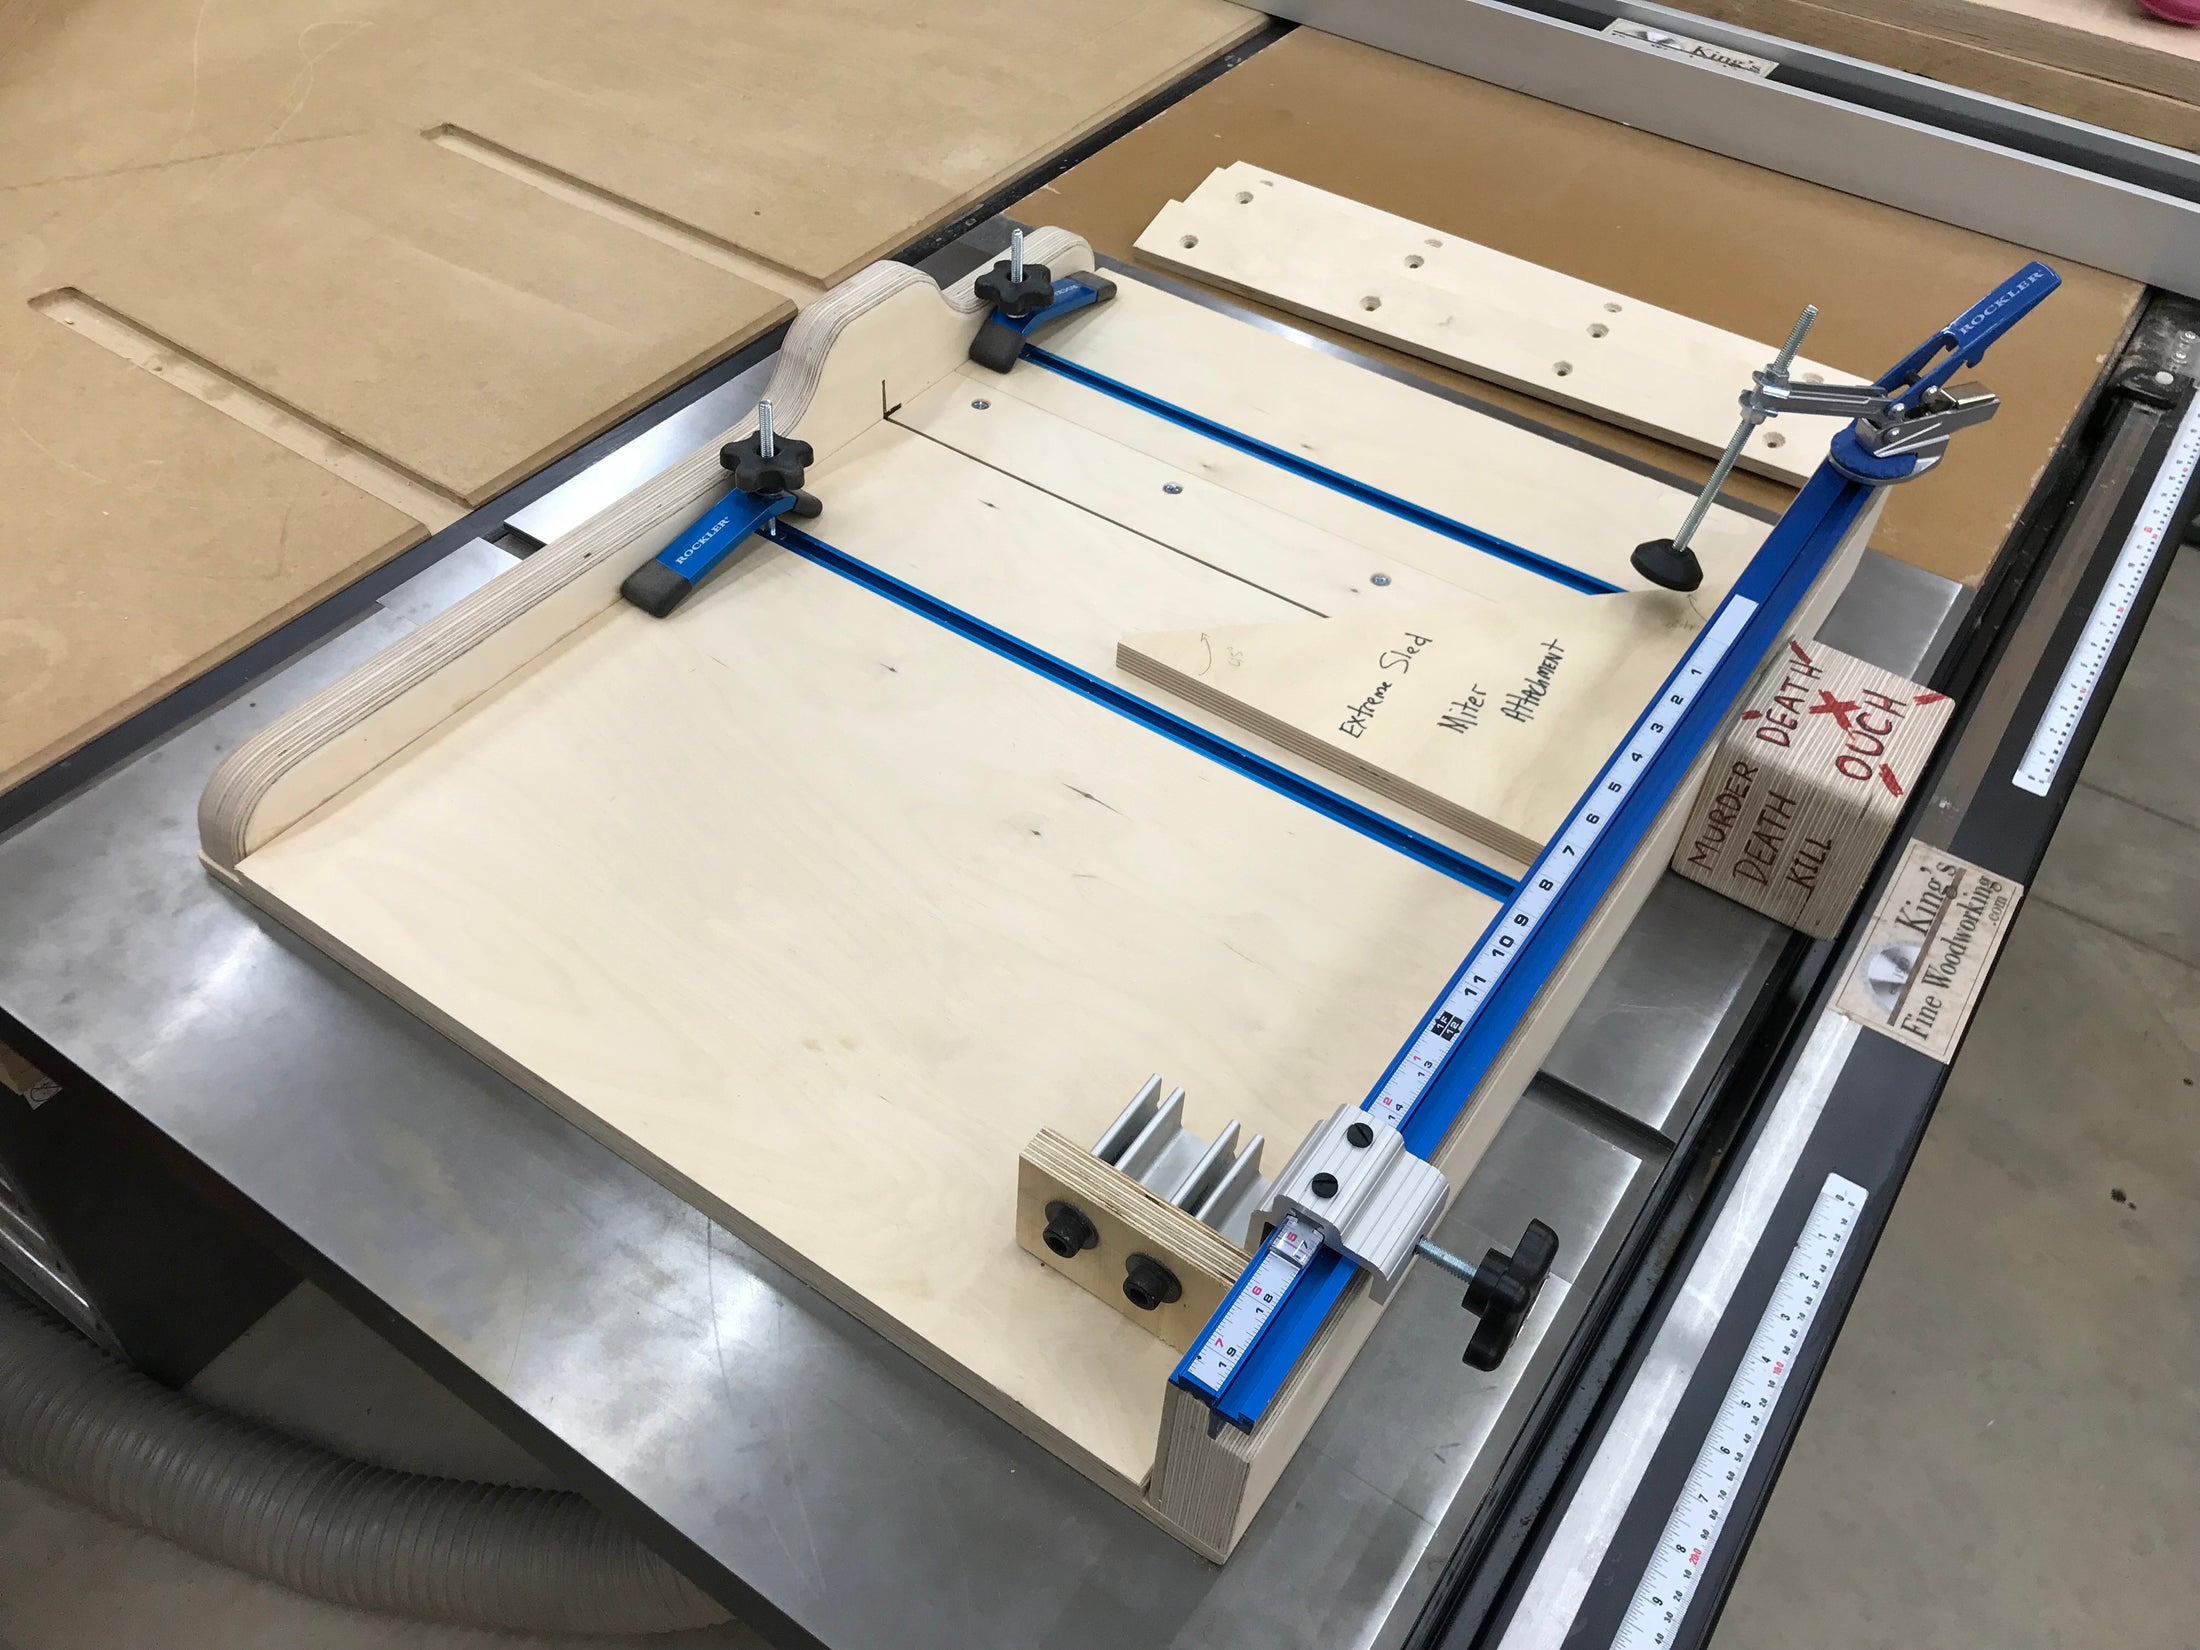 Plans for the Extreme Crosscut Miter Dado Table Saw Sled